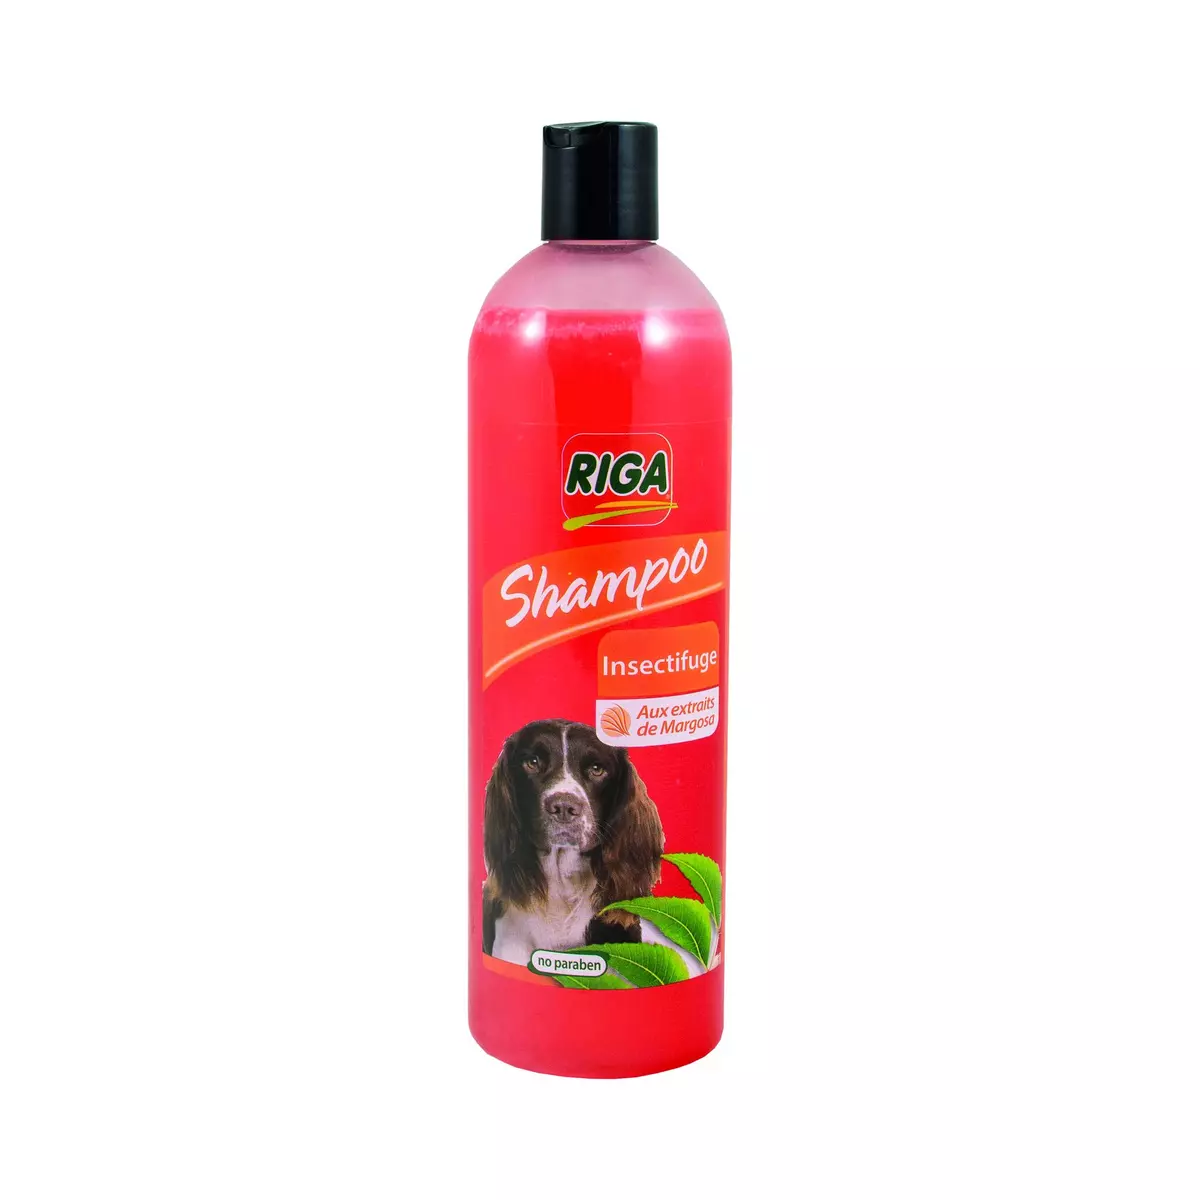 RIGA Shampooing insectifuge chien aux extraits de margosa 500ml